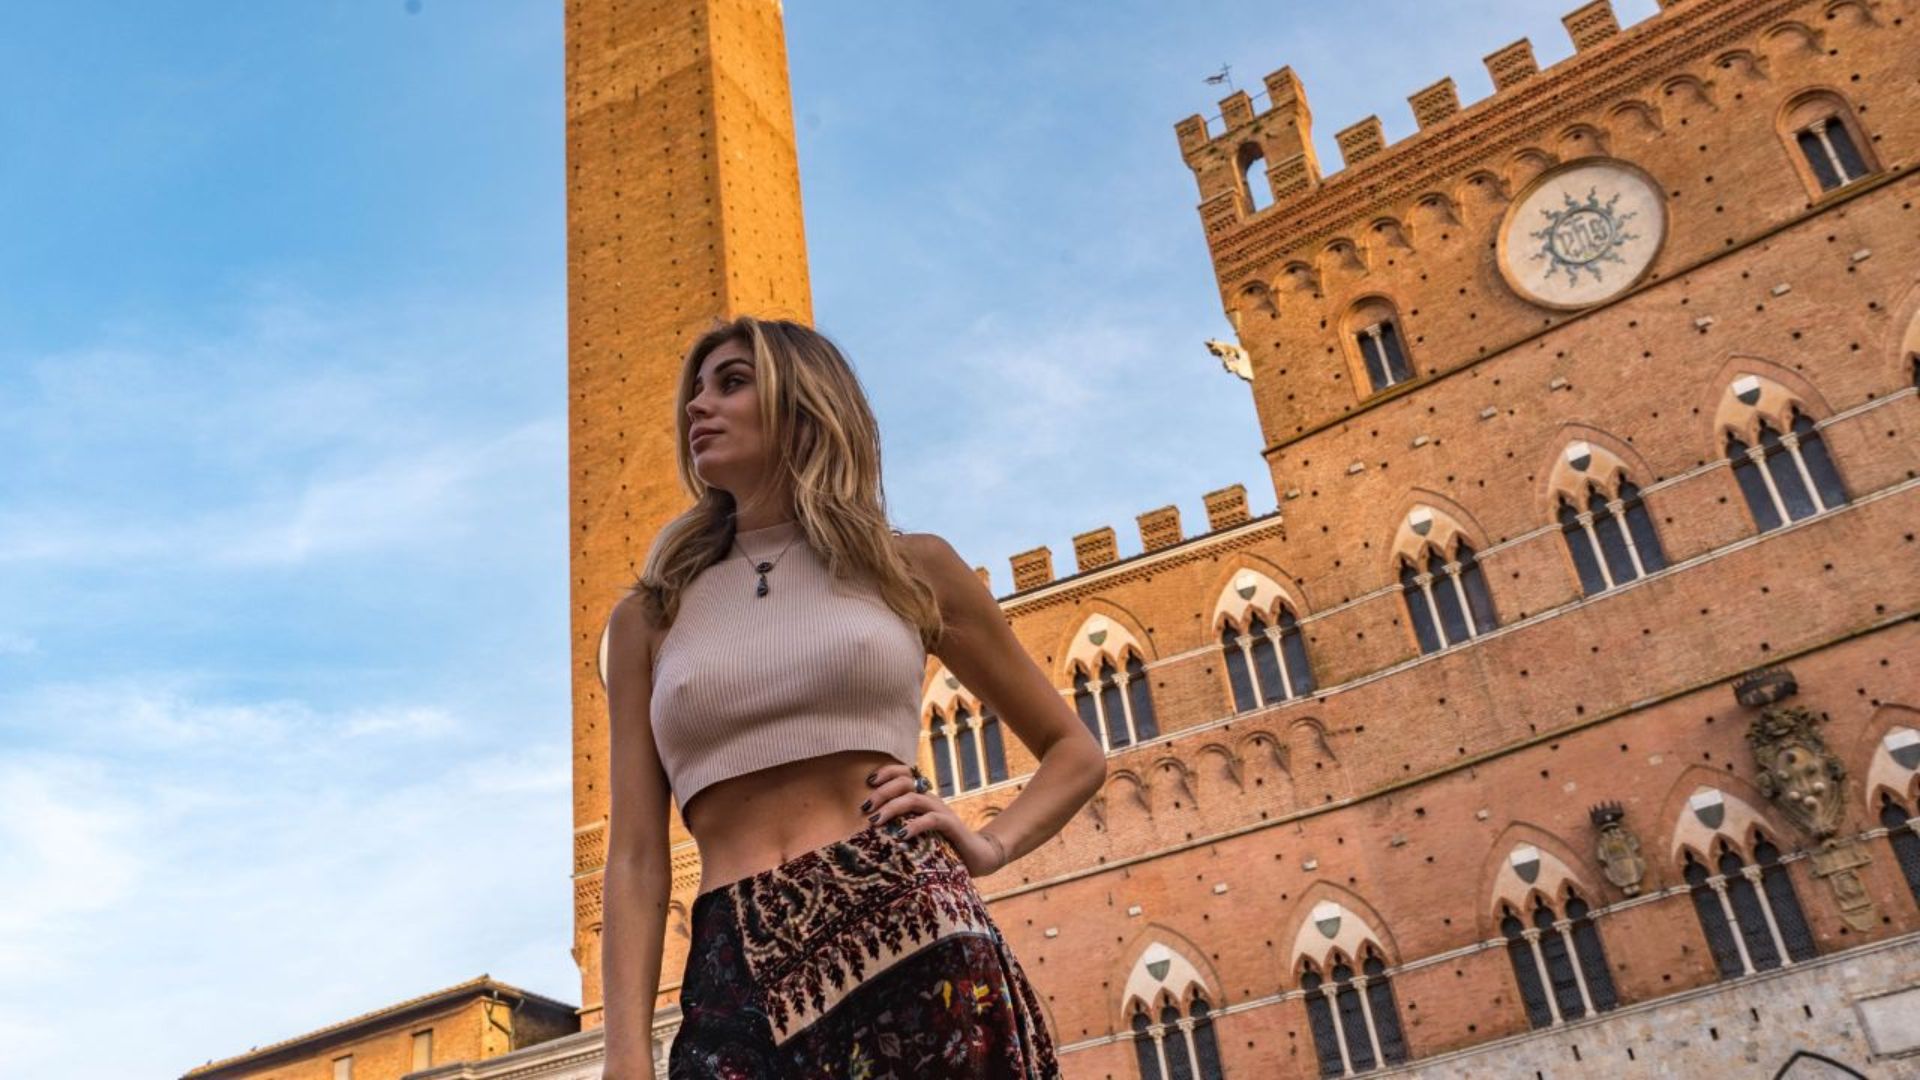 Private tour to discover the most iconic places of the historic center of Siena with personal photographer